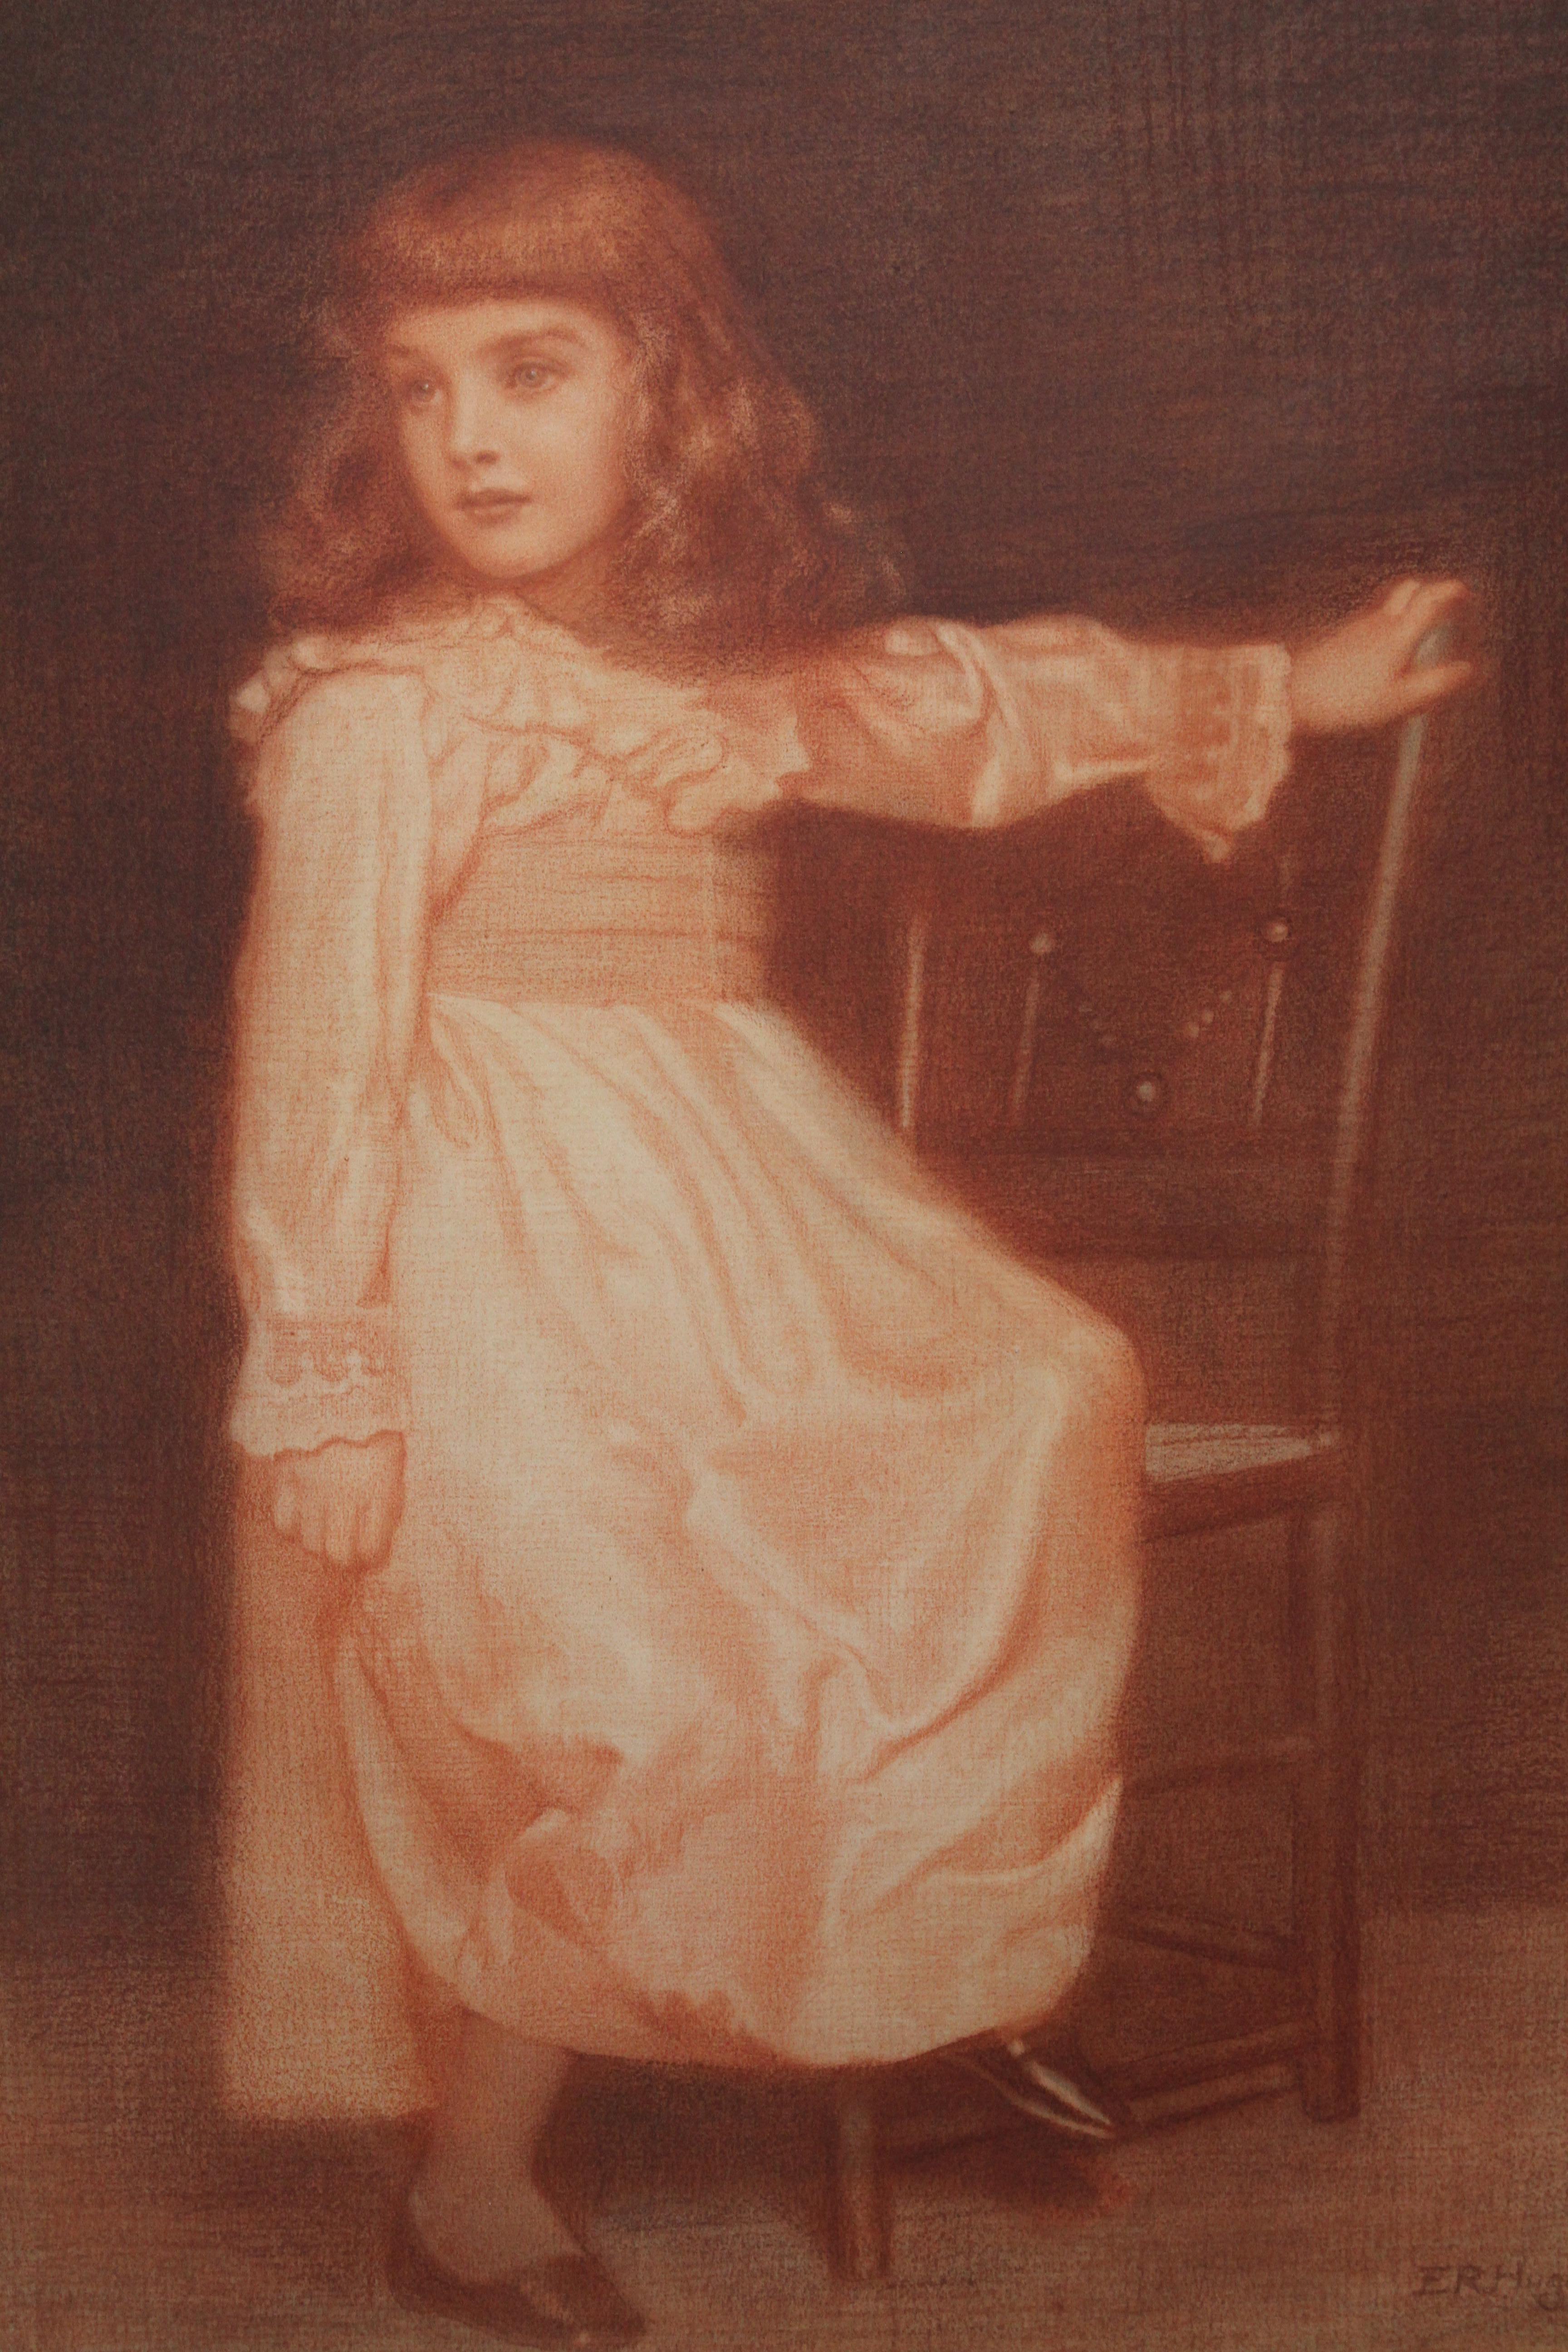 This captivating Victorian sanguine chalk portrait drawing of a young girl is by Pre-Raphaelite British artist Edward Robert Hughes. Signed and dated 1896, Hughes depicts in great detail her sweet young face and beautiful dress which appears to